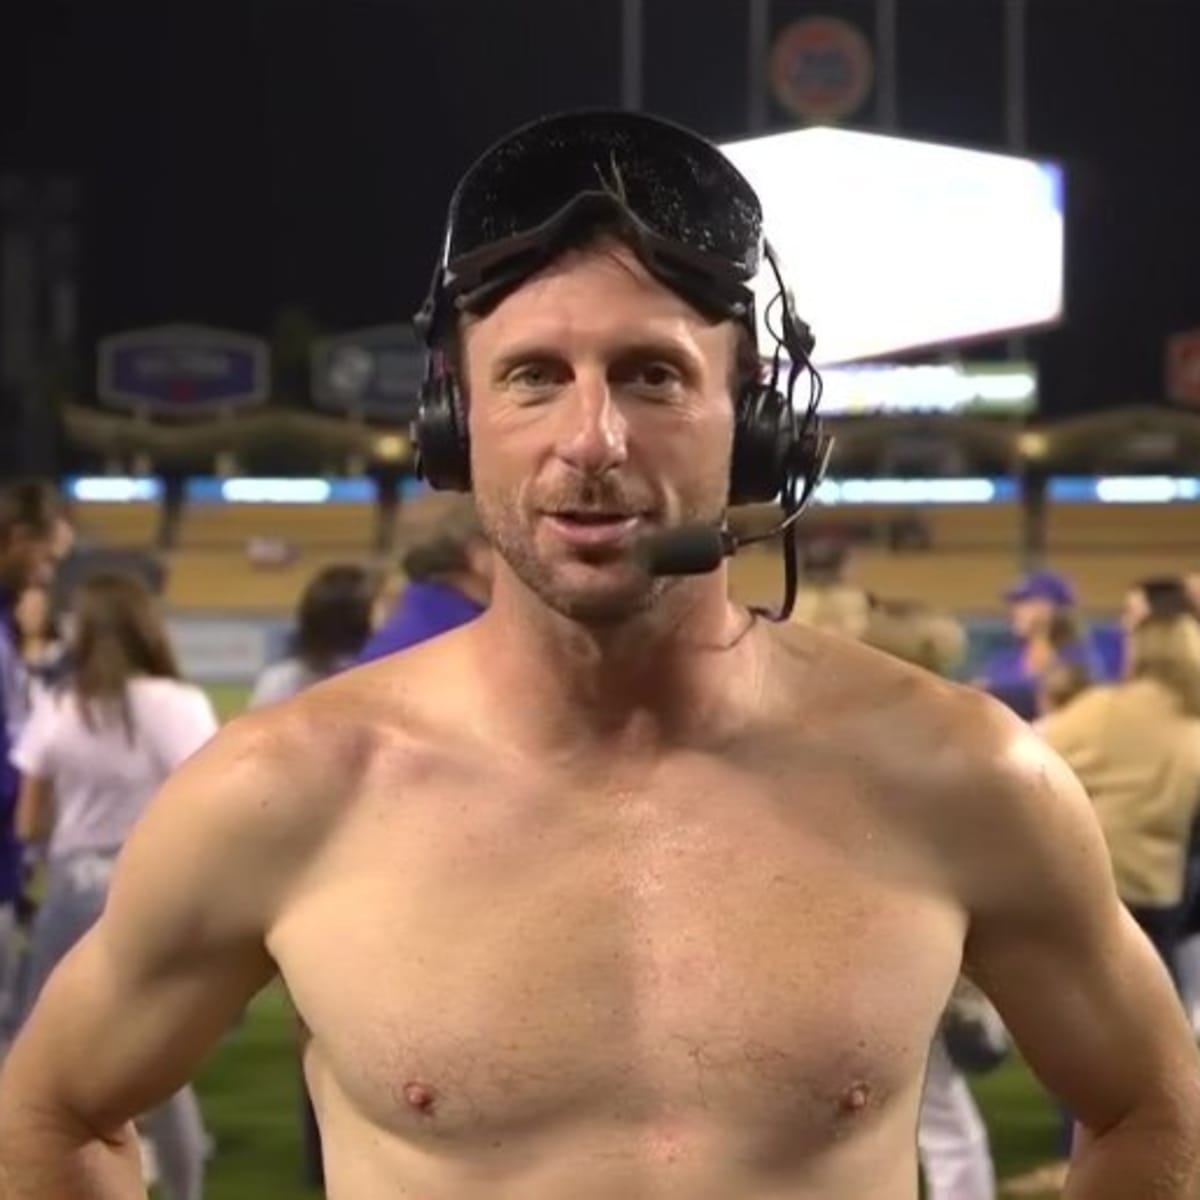 Max Scherzer Drunk and Shirtless at Postgame Interview for Dodgers Win